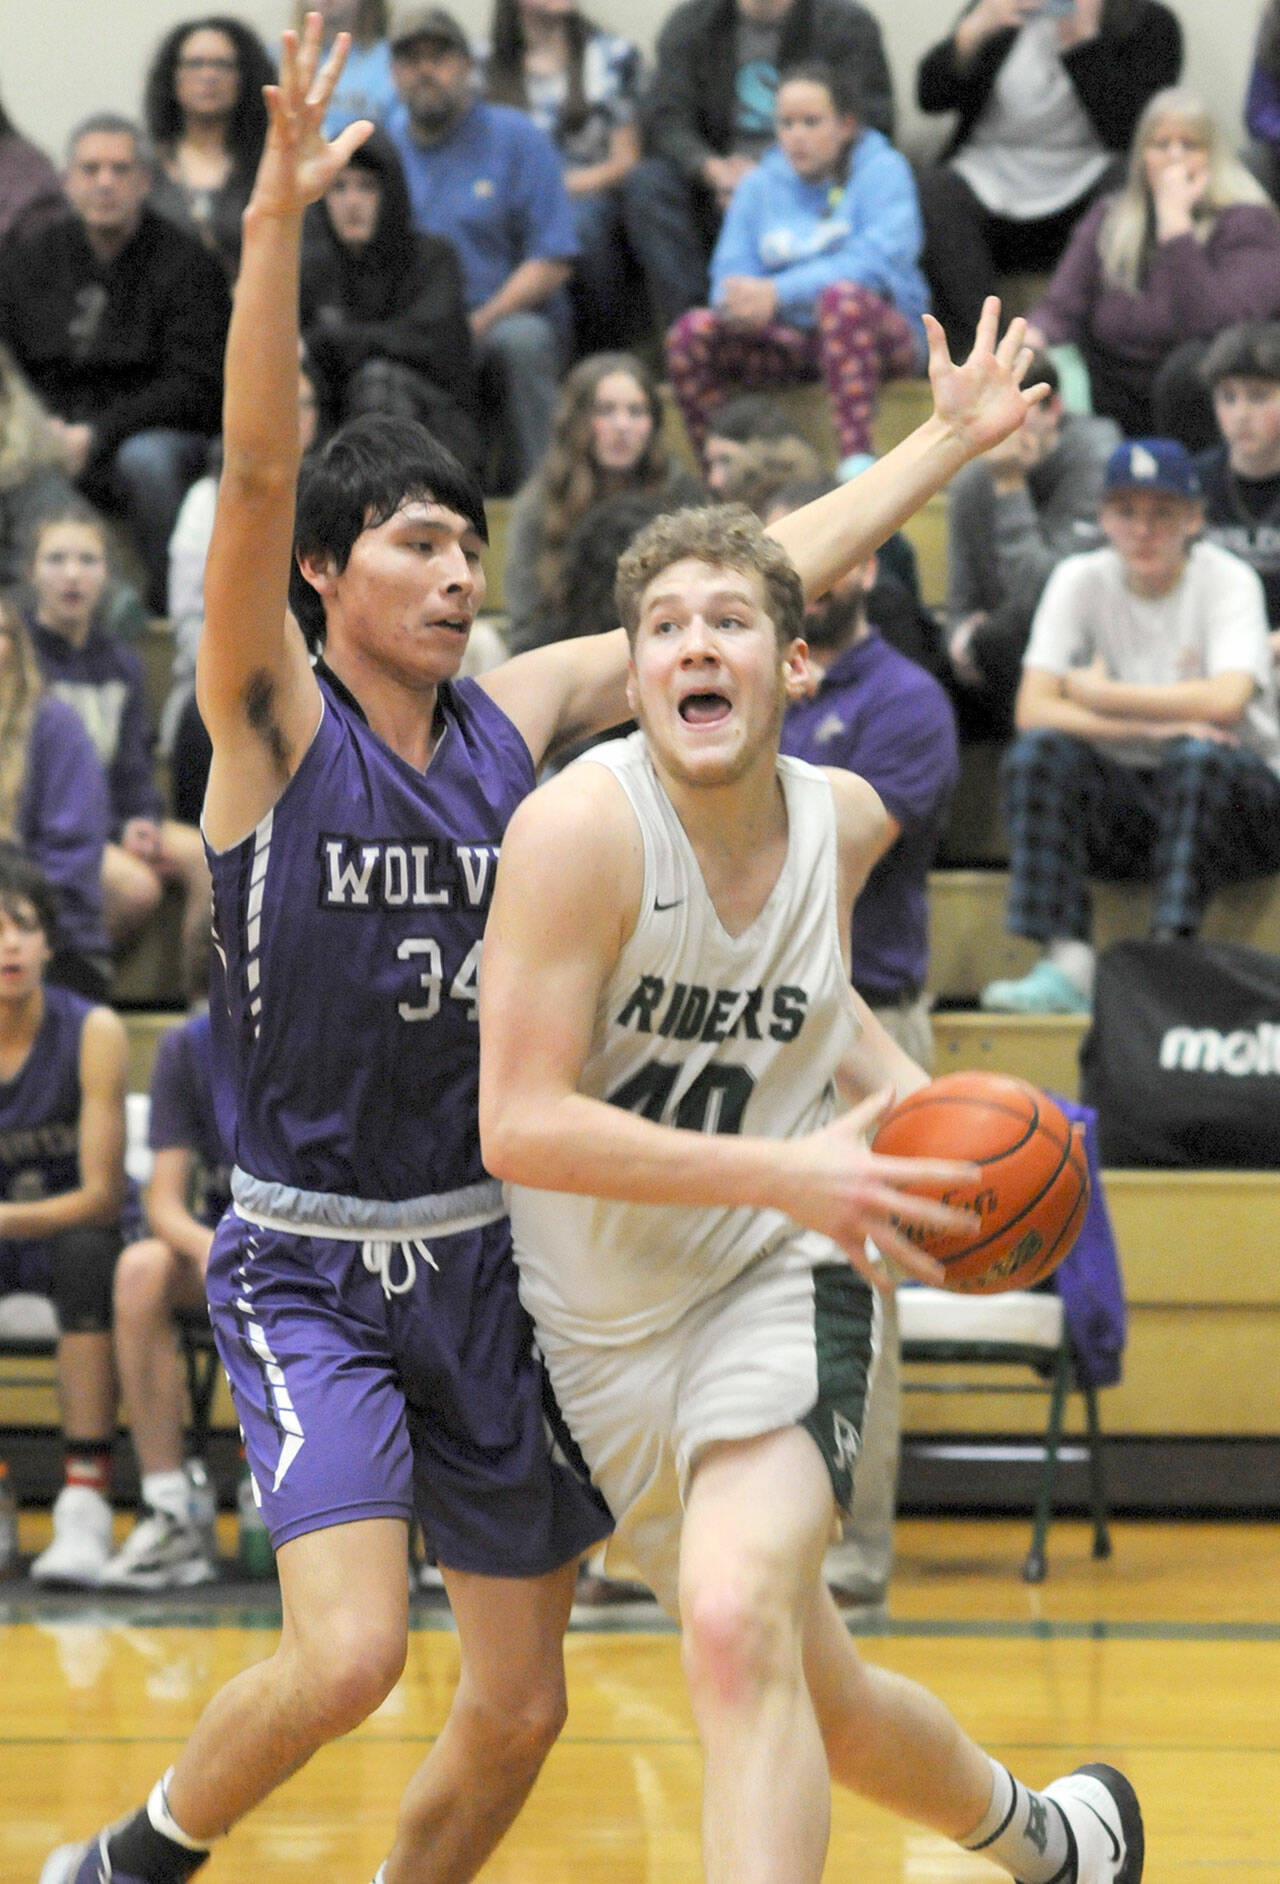 Photos by Keith Thorpe/Olympic Peninsula News Group
Port Angeles’ Isaiah Shamp, right, pushes past Sequim’s Isaiah Moore on the way to the lane on Jan. 10 in Port Angeles.